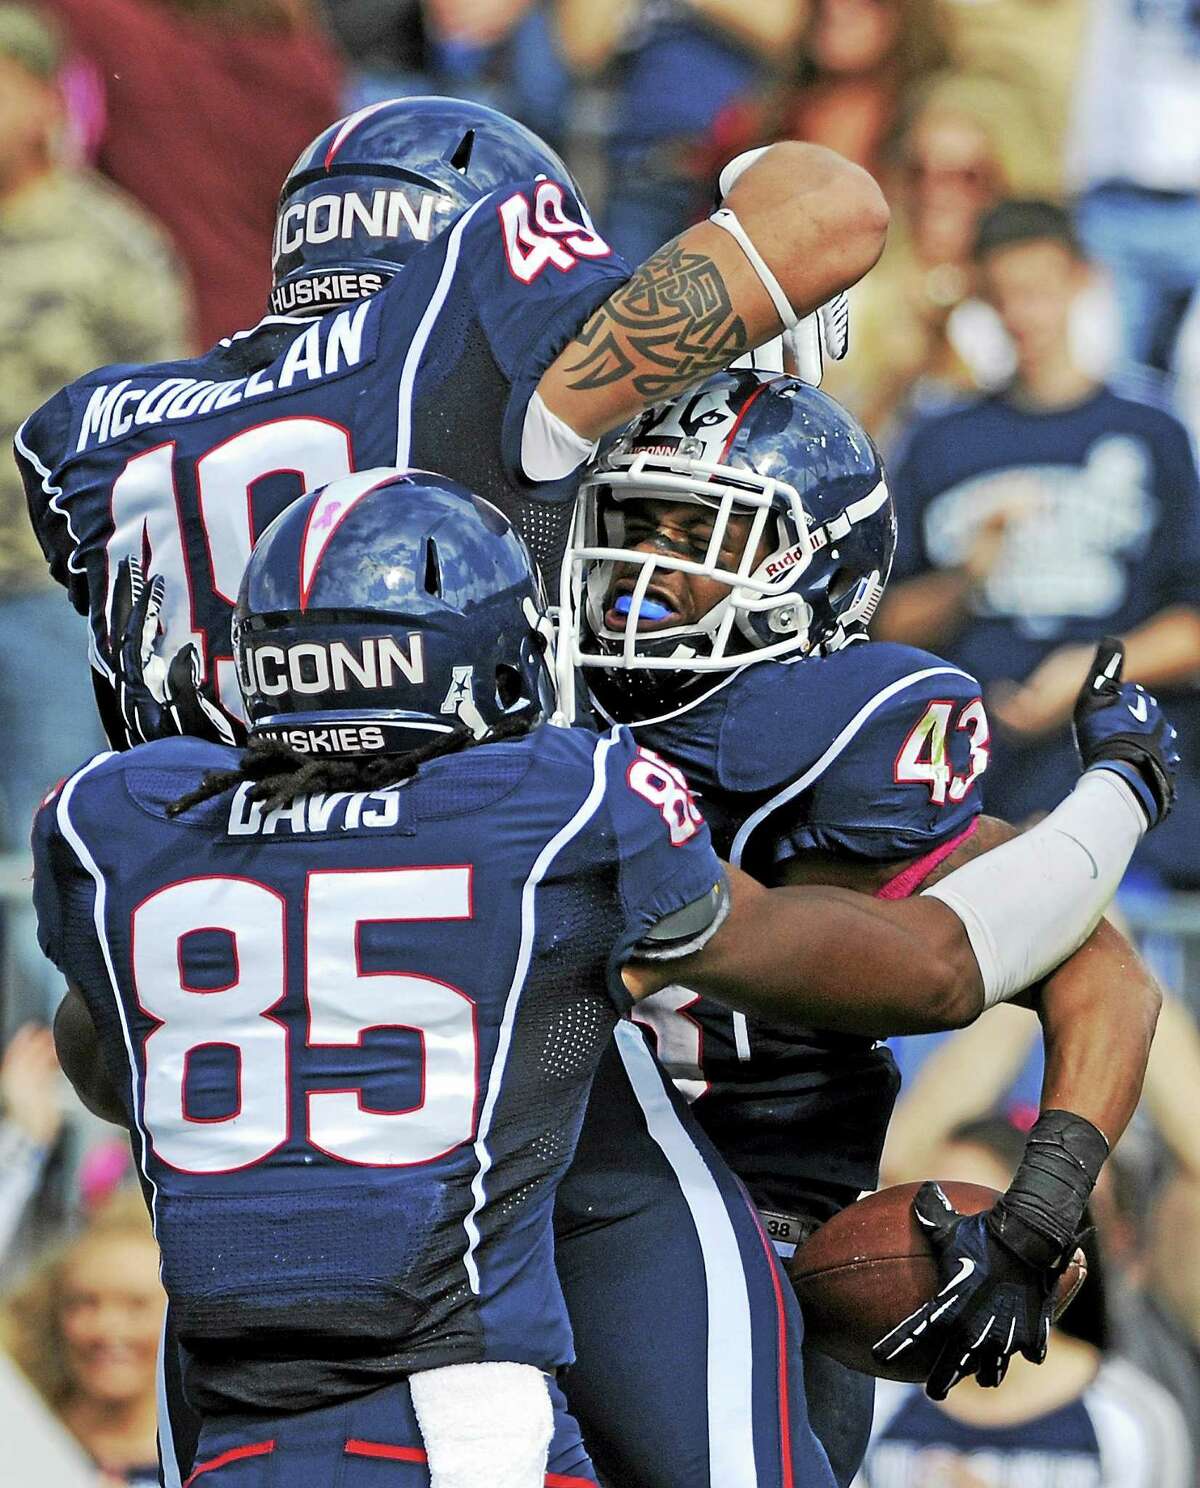 Sean McQuillan (49) celebrates with Lyle McCombs (43) and Geremy Davis (85) after a McCombs touchdown in a 2013 game.